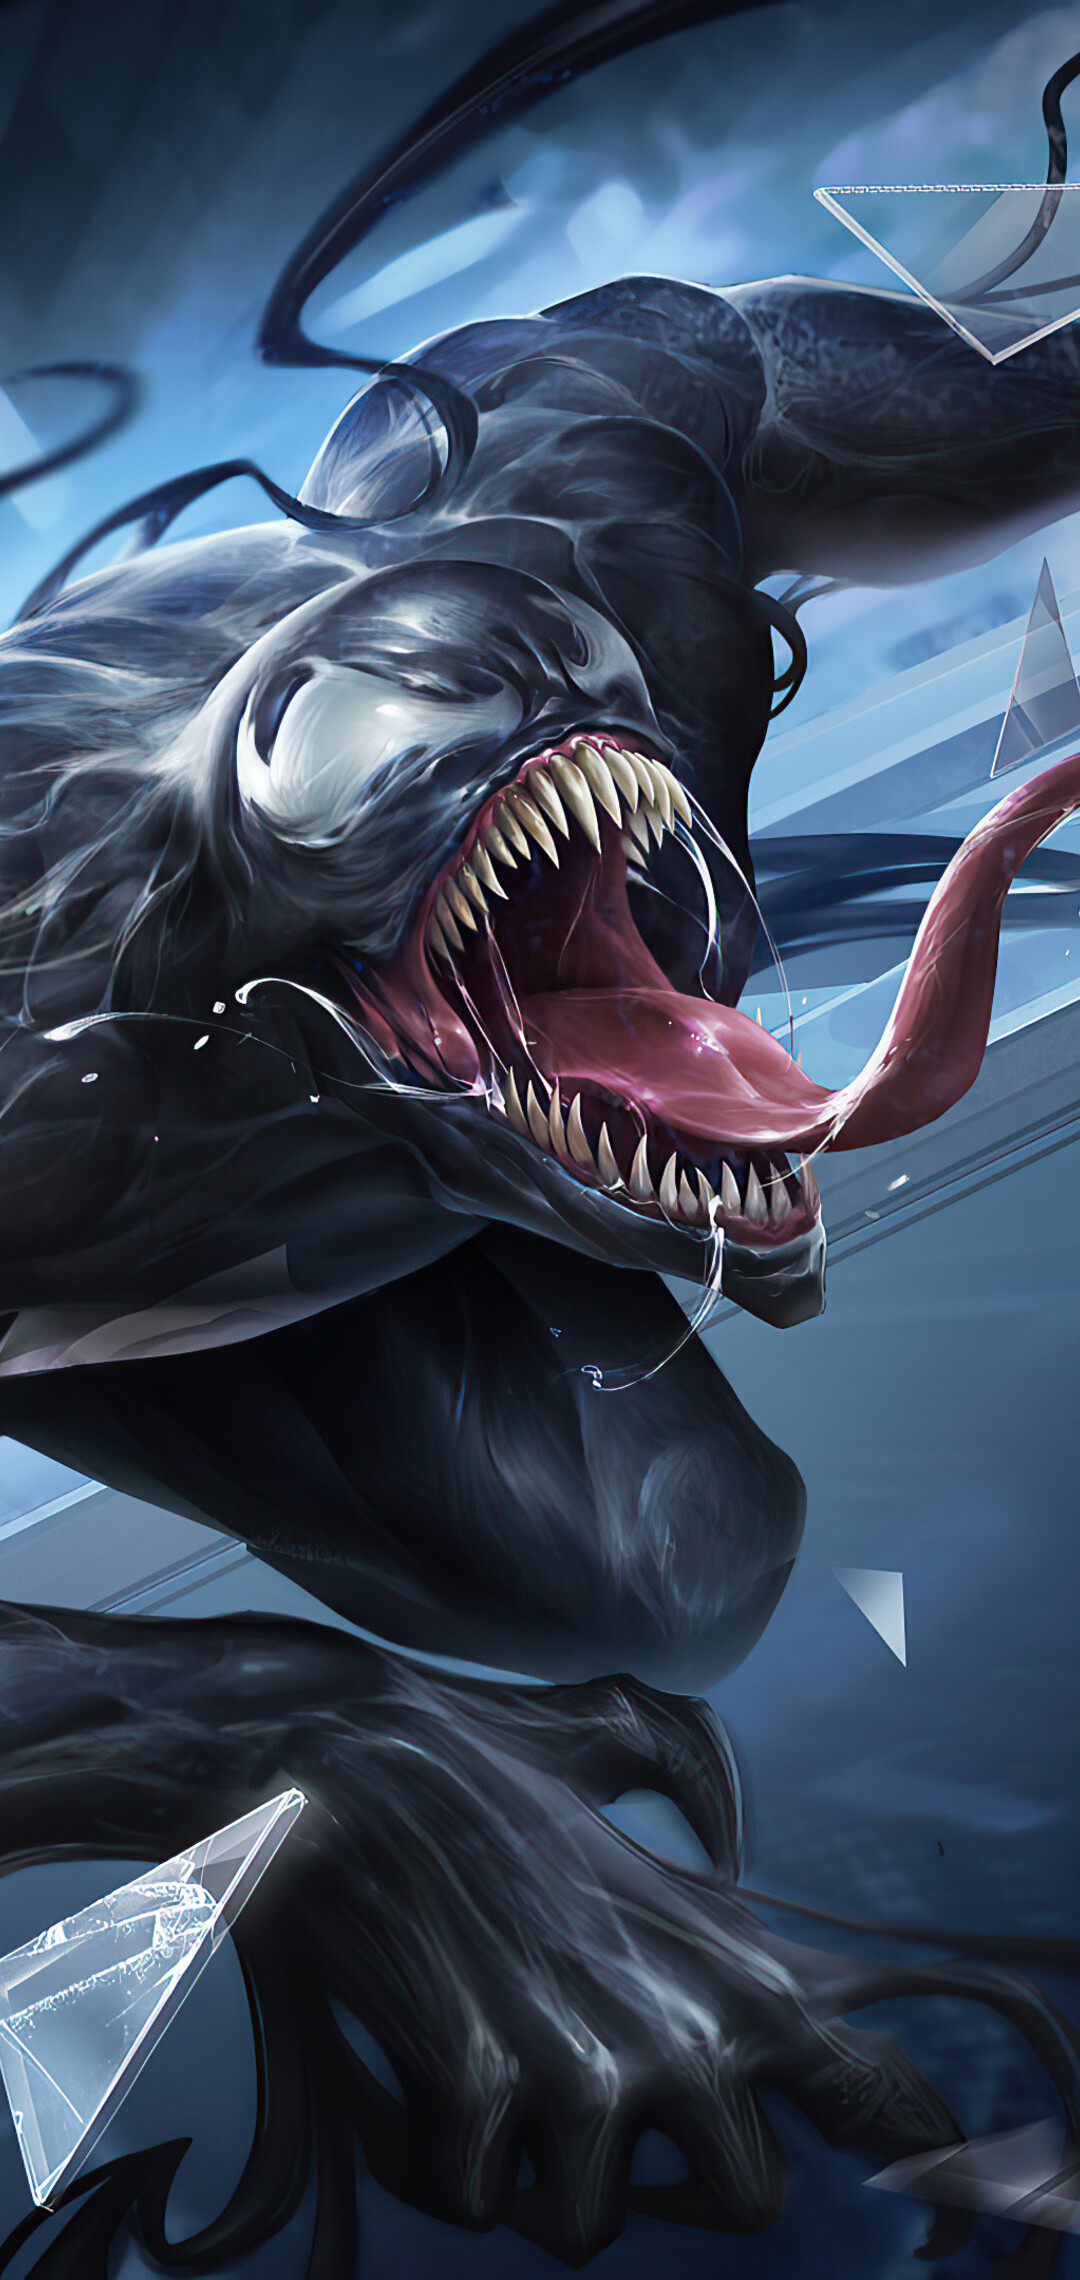 Venom: A Symbiote, an alien life form capable of infusing itself with its host body. 1080x2280 HD Background.